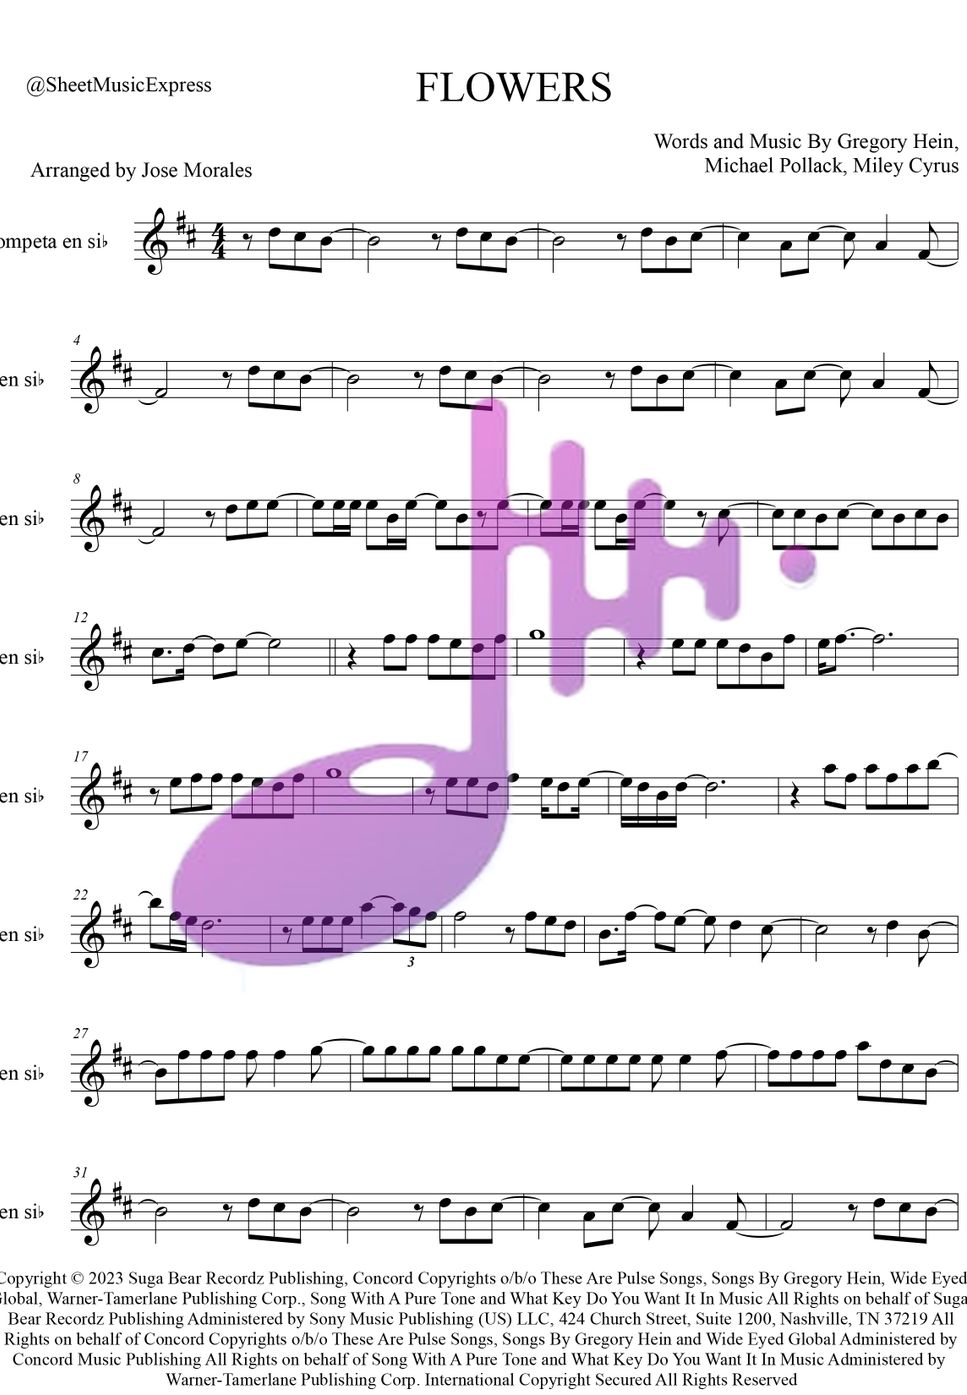 Miley Cyrus - Flowers - Miley Cyrus Trumpet in Bb (Pop) by Sheet Music Express